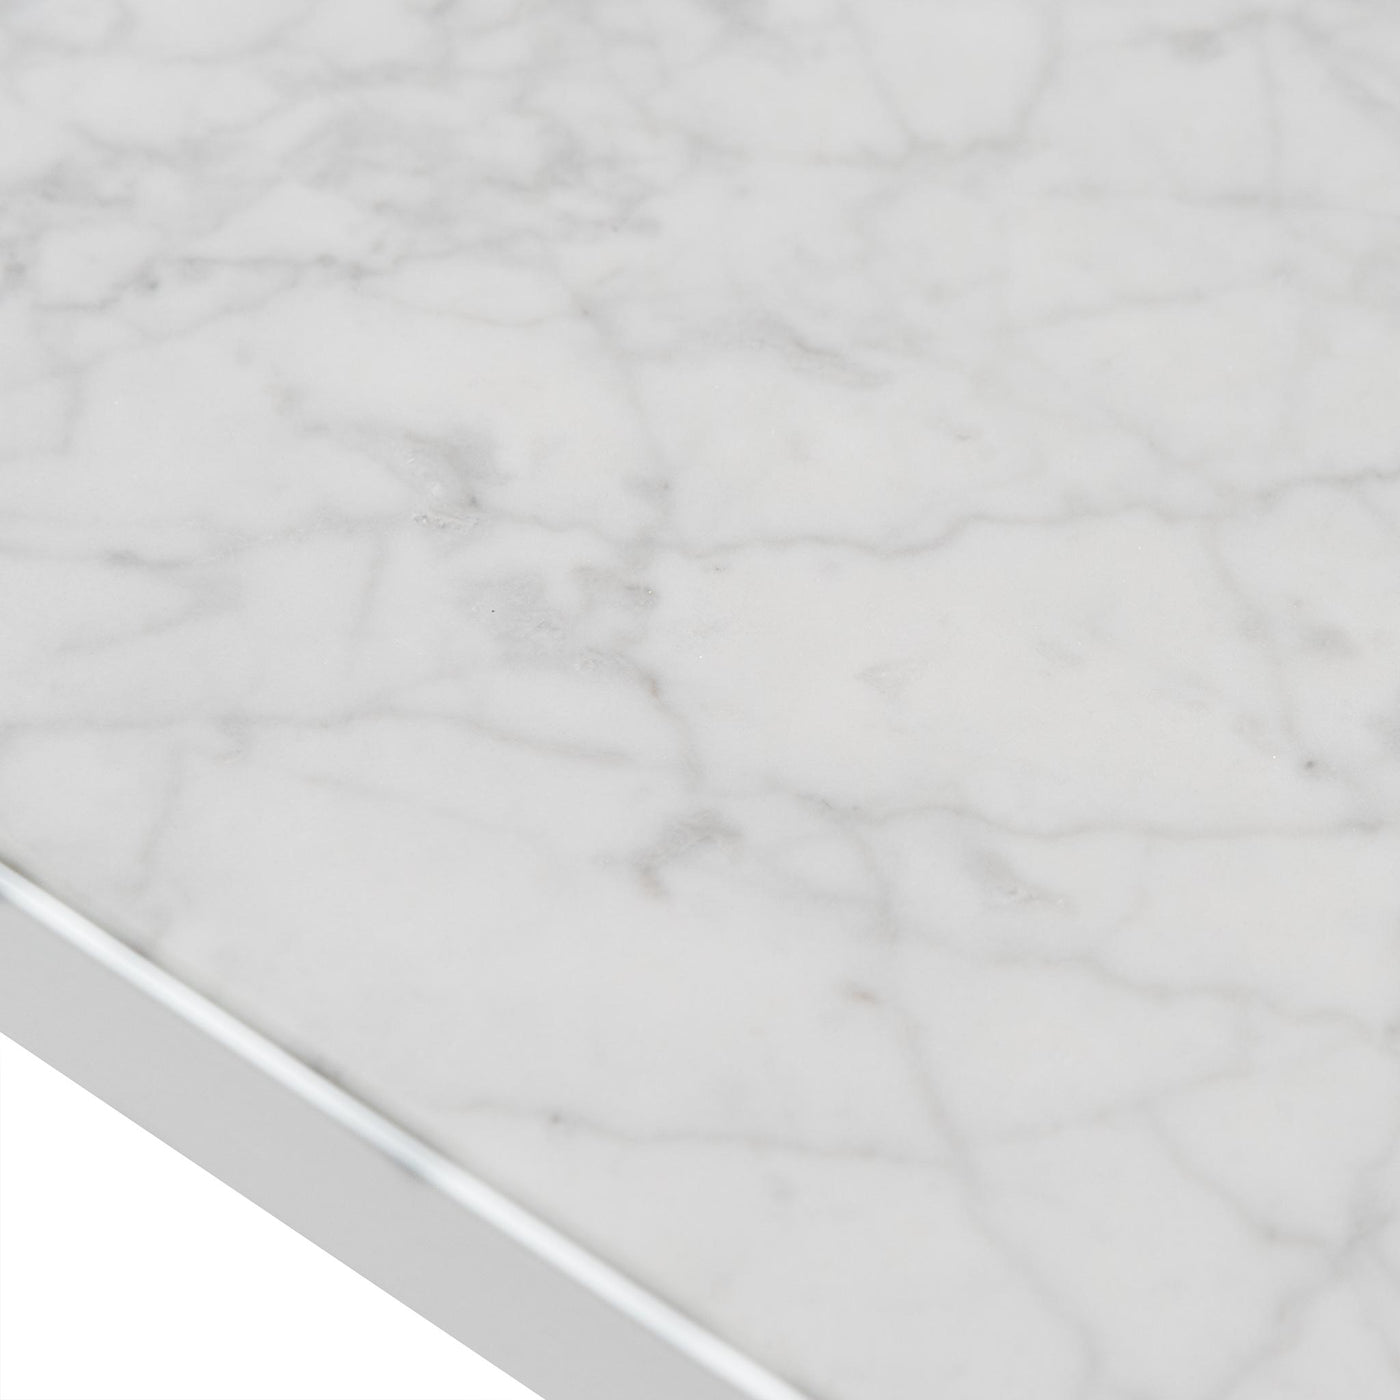 Marble Console Table - White